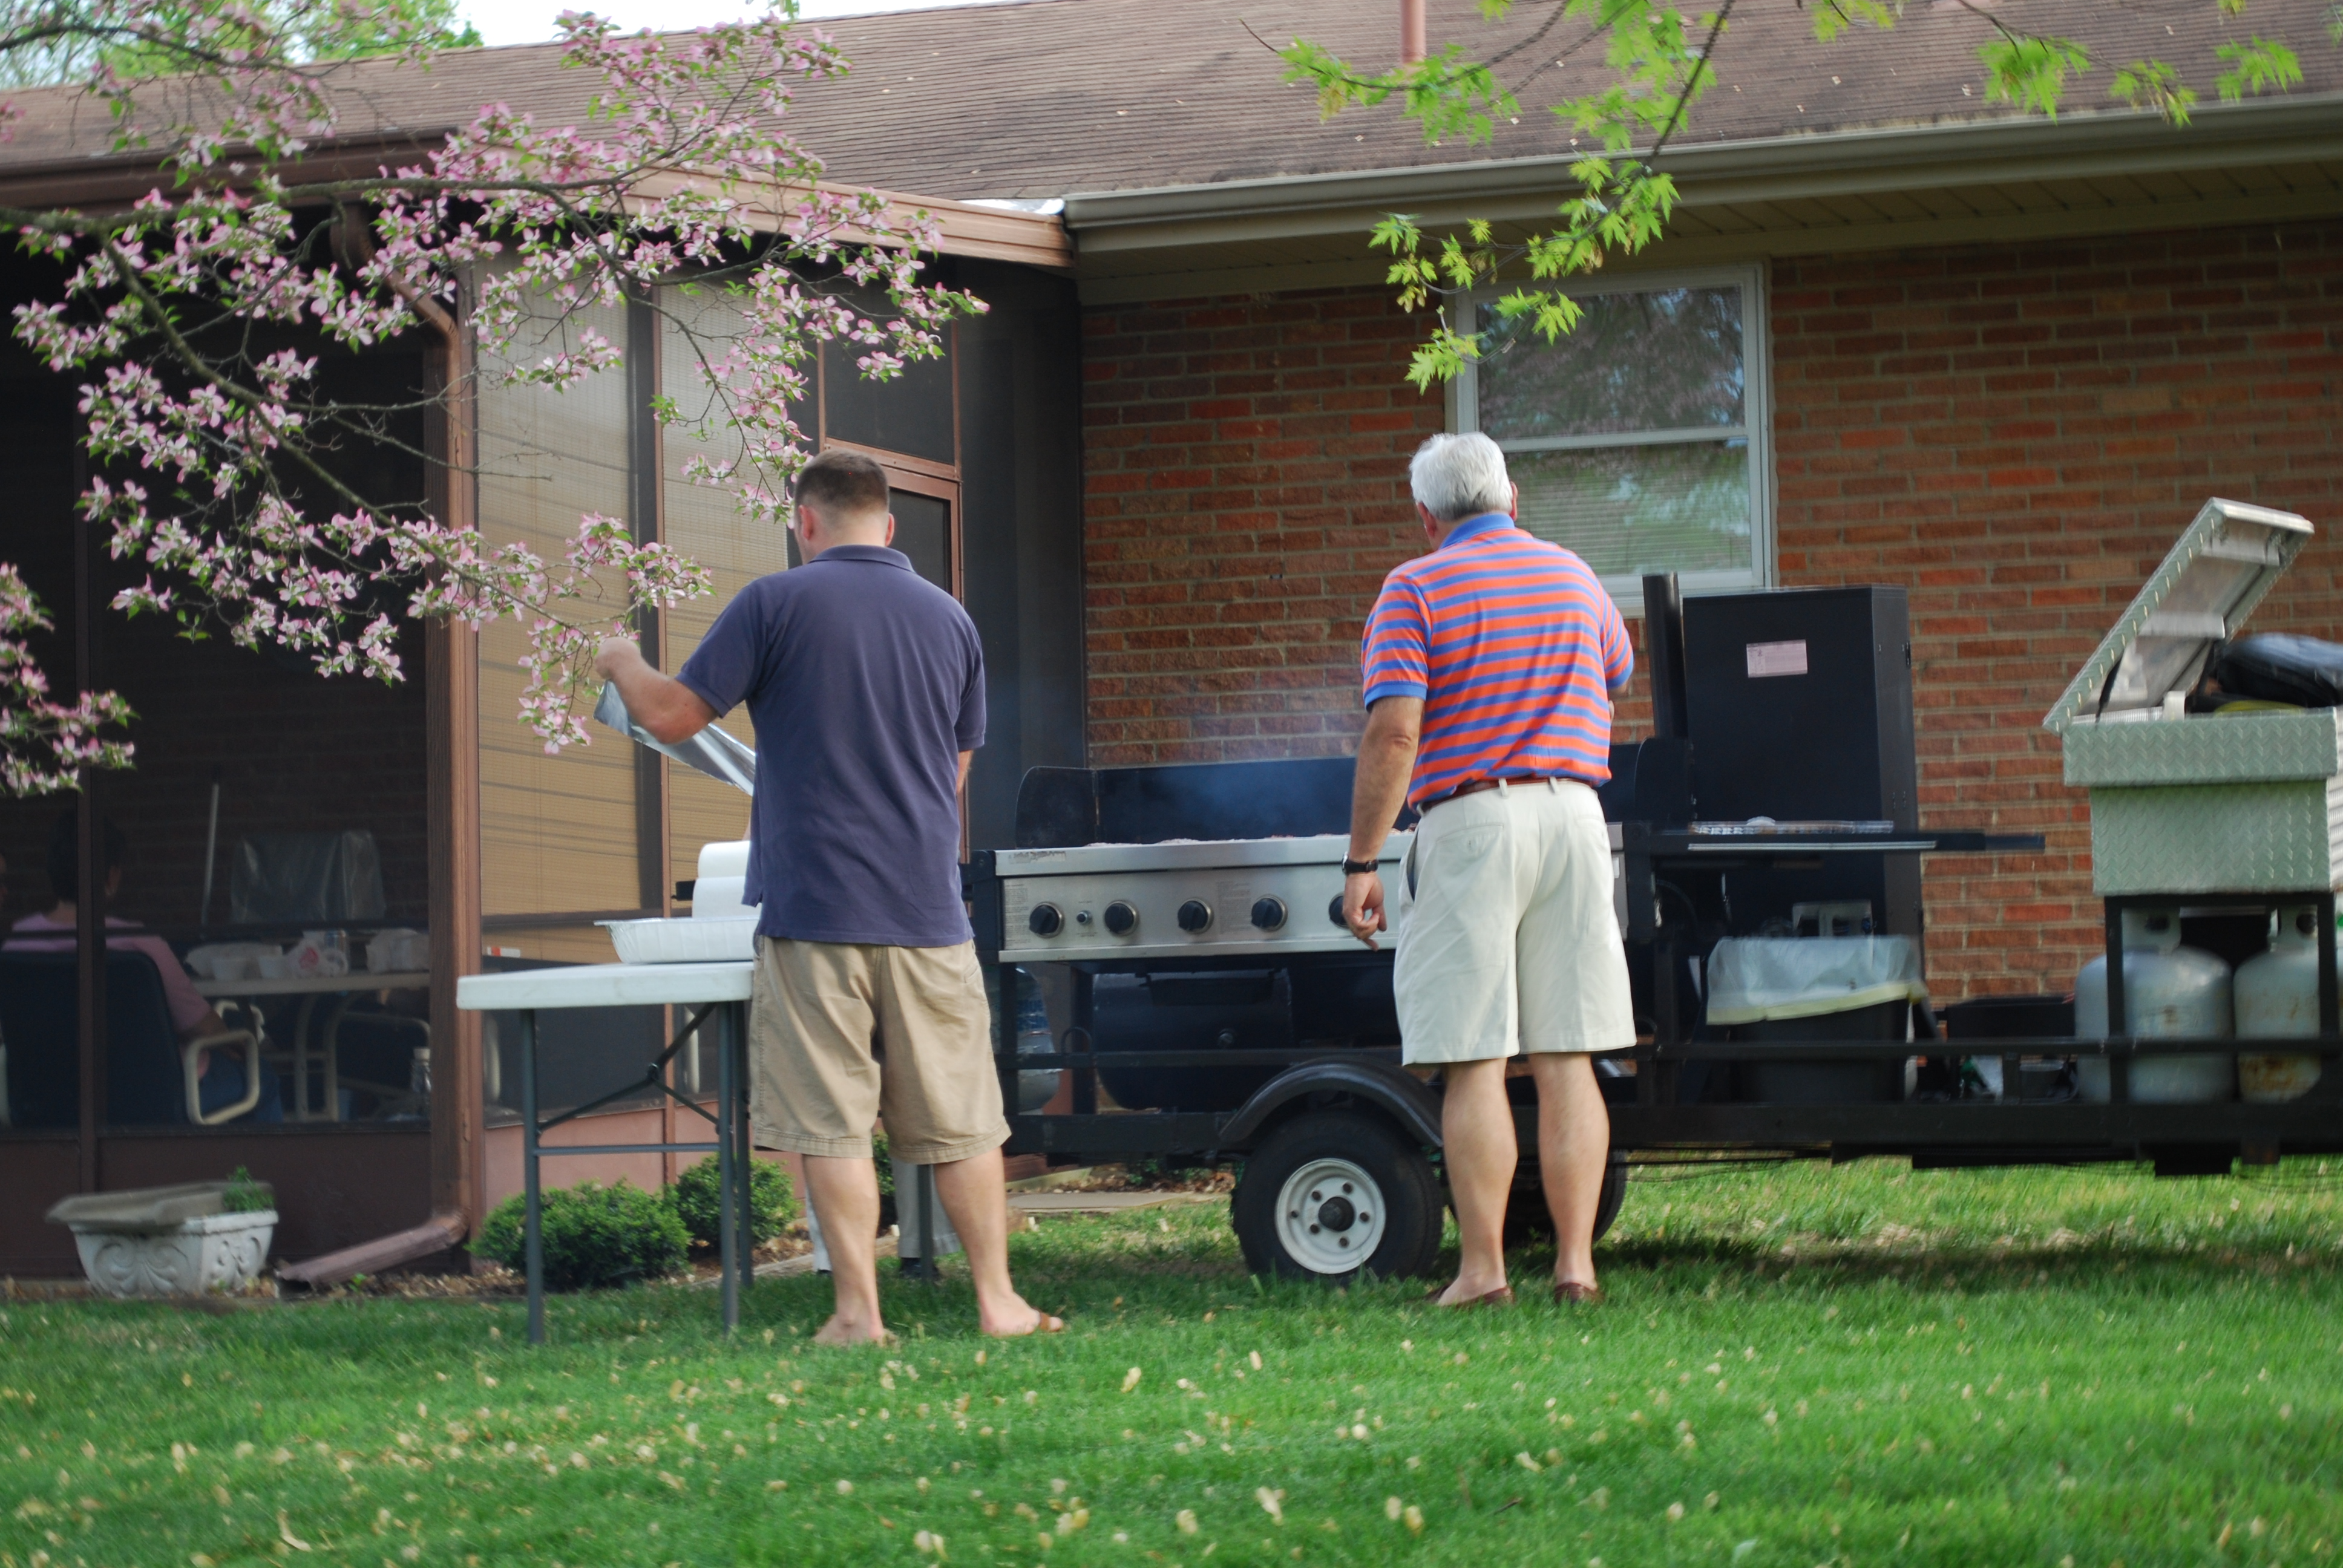 John and Dad were manning the grill